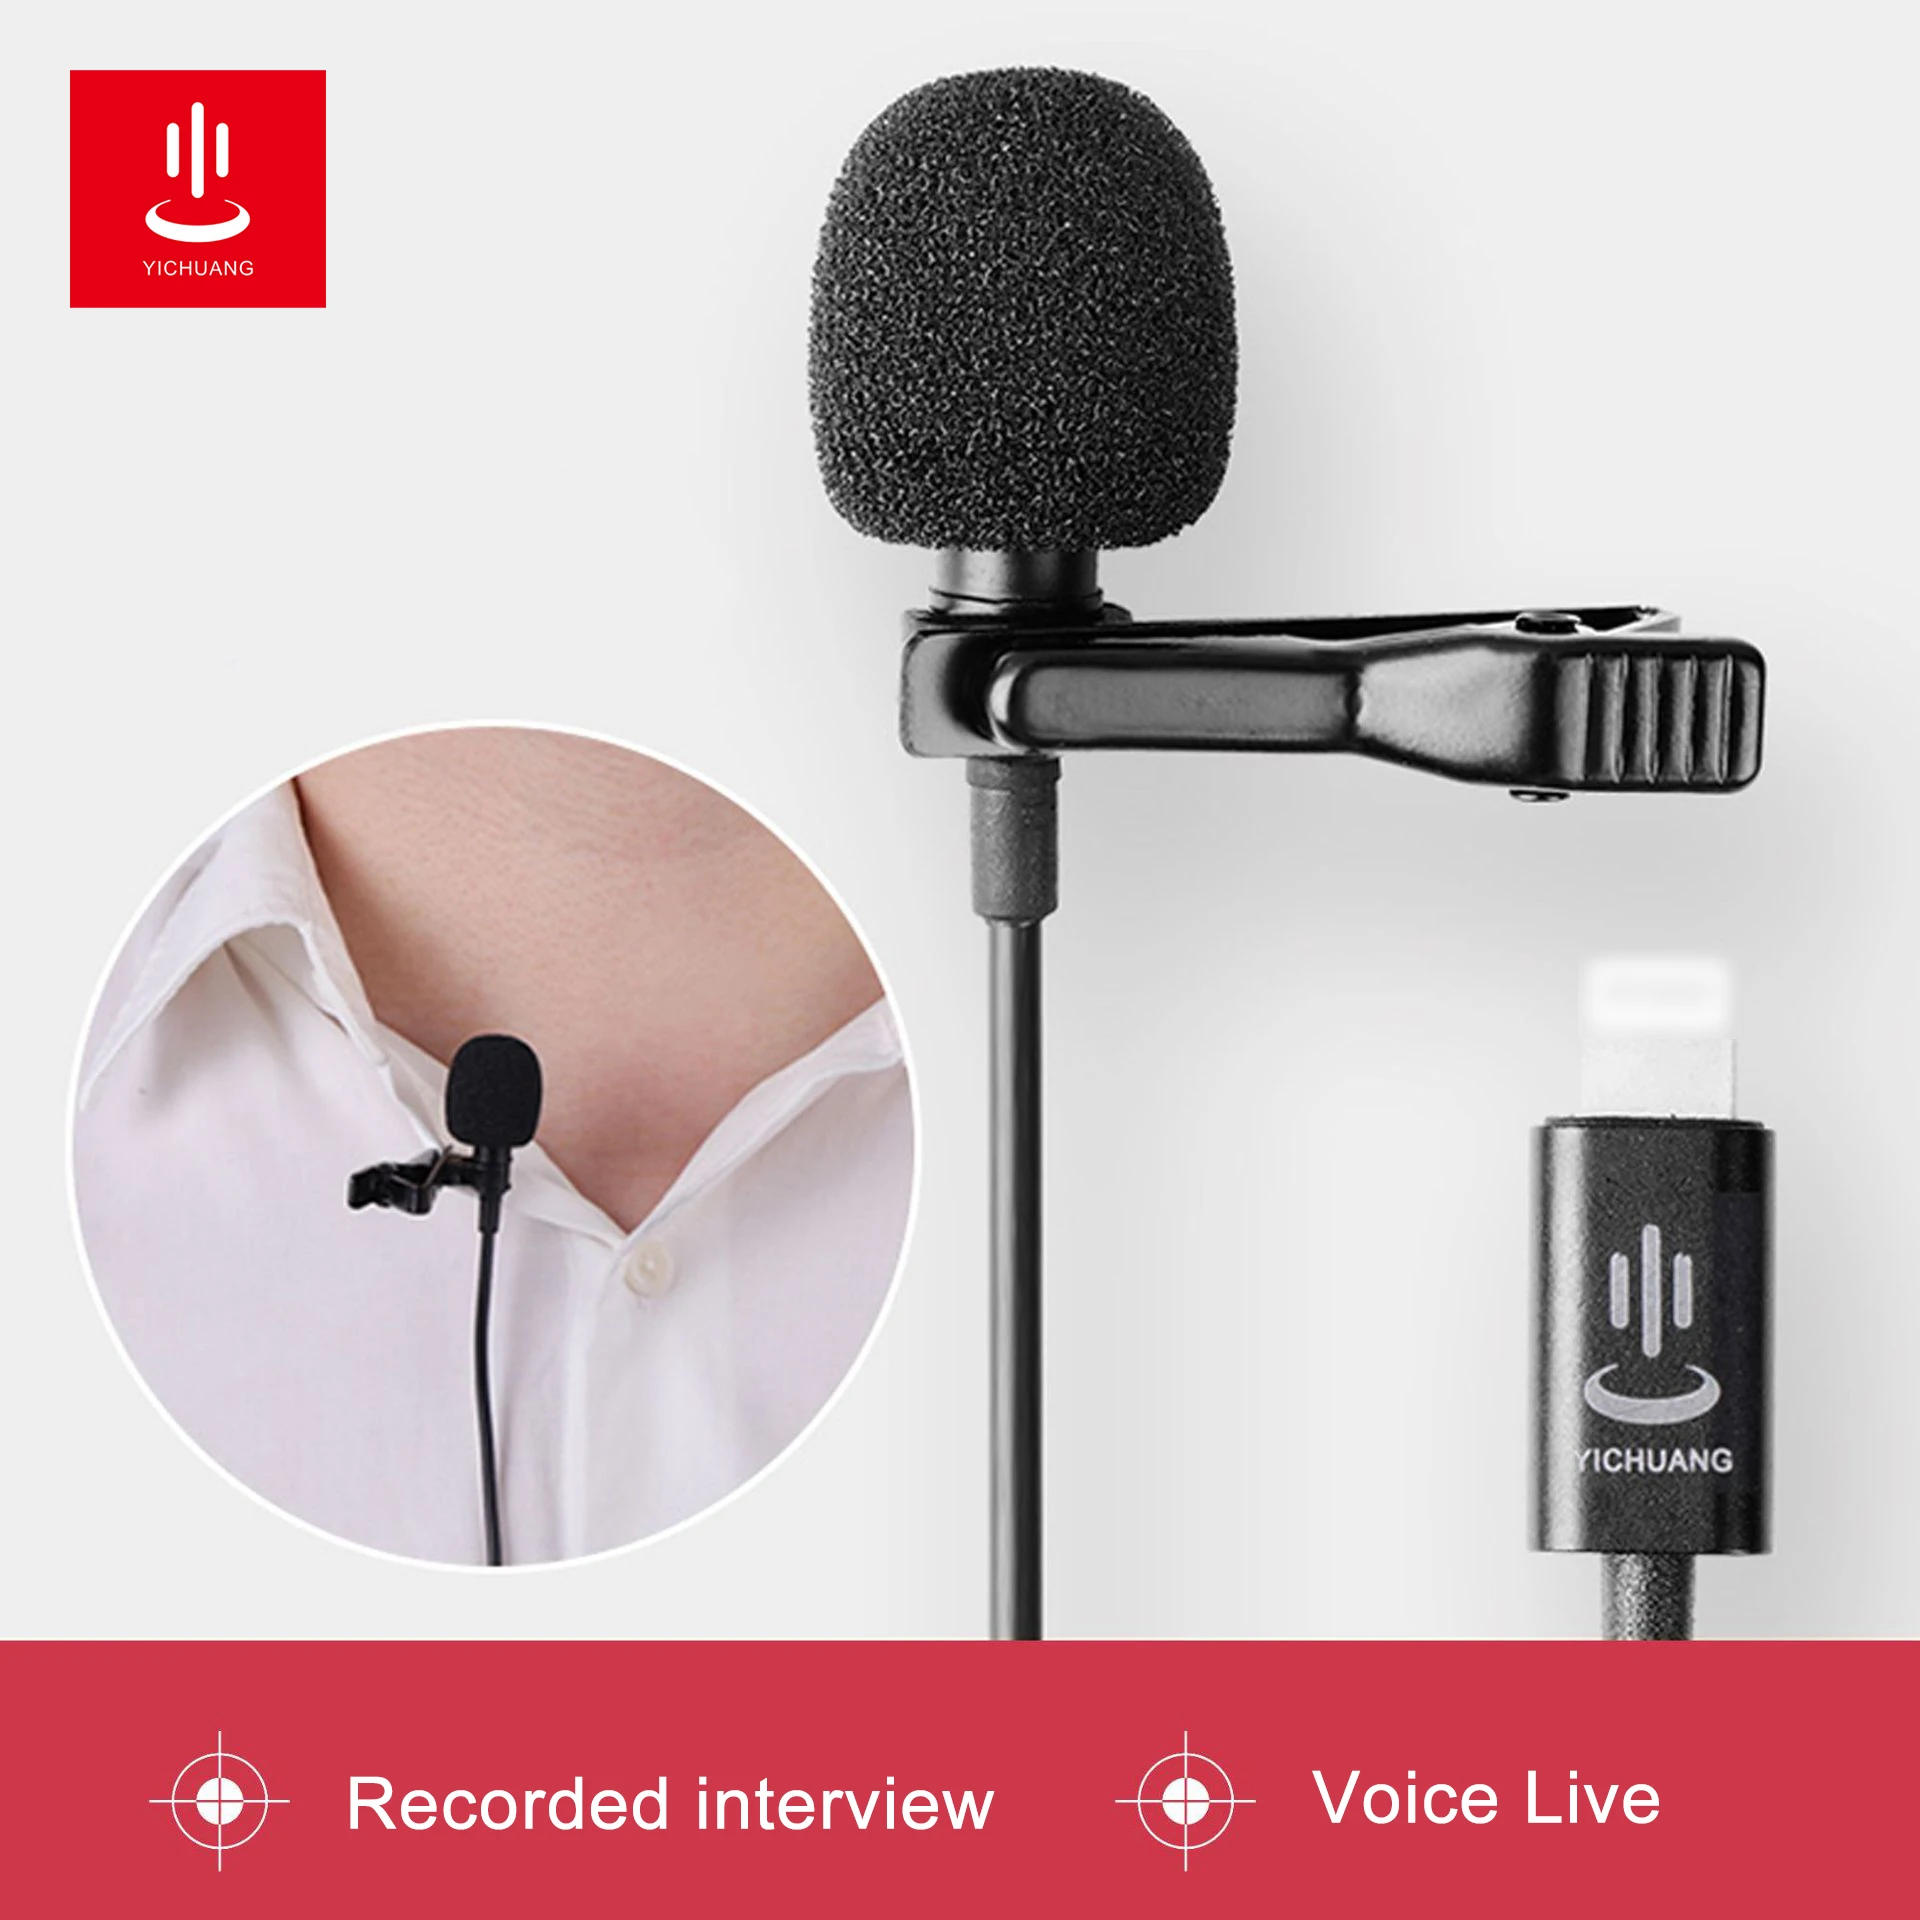 

YICHUANG YC-LM10 II 6M Professional Lavalier Lightning Microphone for iPhone XS X/8/8 Plus/6/7 Plus iPad 4/3/2 iPad Pro iPad